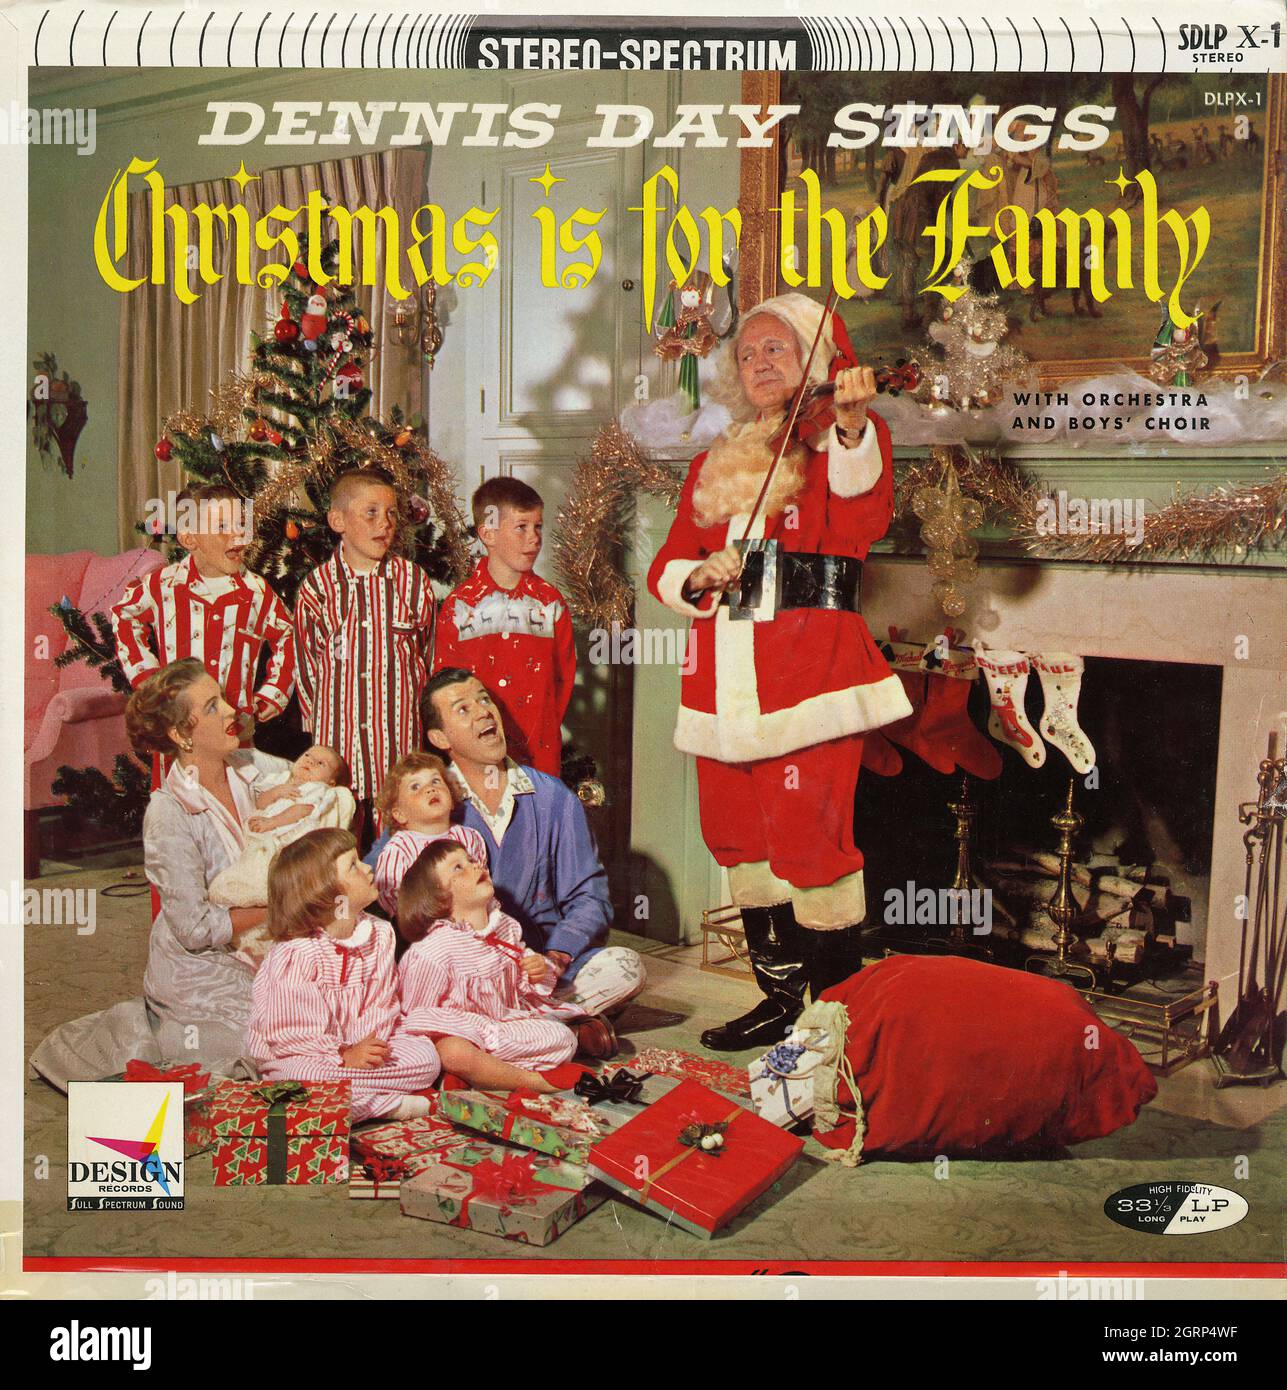 Dennis Day - Christmas Is For The Family - Vintage American Comedy Vinyl Album Stockfoto